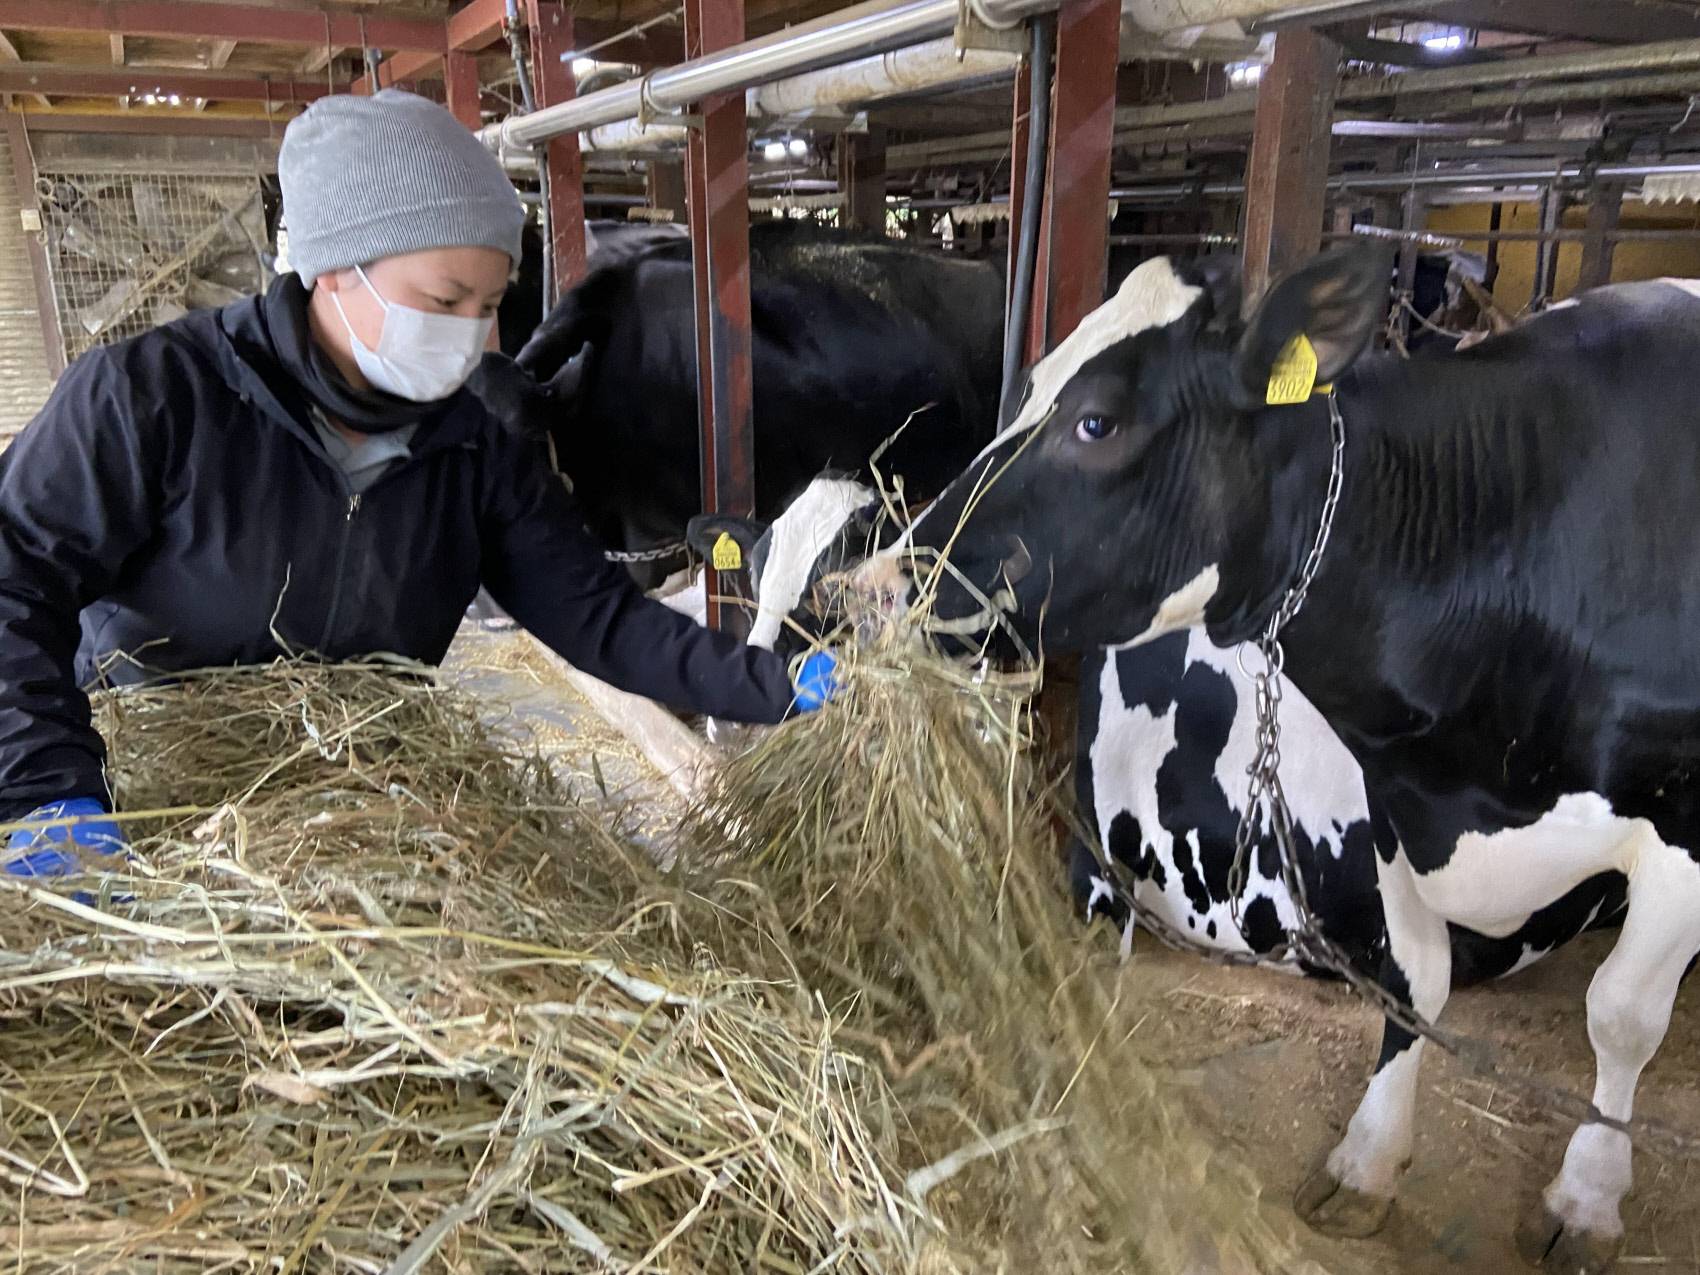 Japan Sees Fewer Dairy Farmers amid High Feed Costs